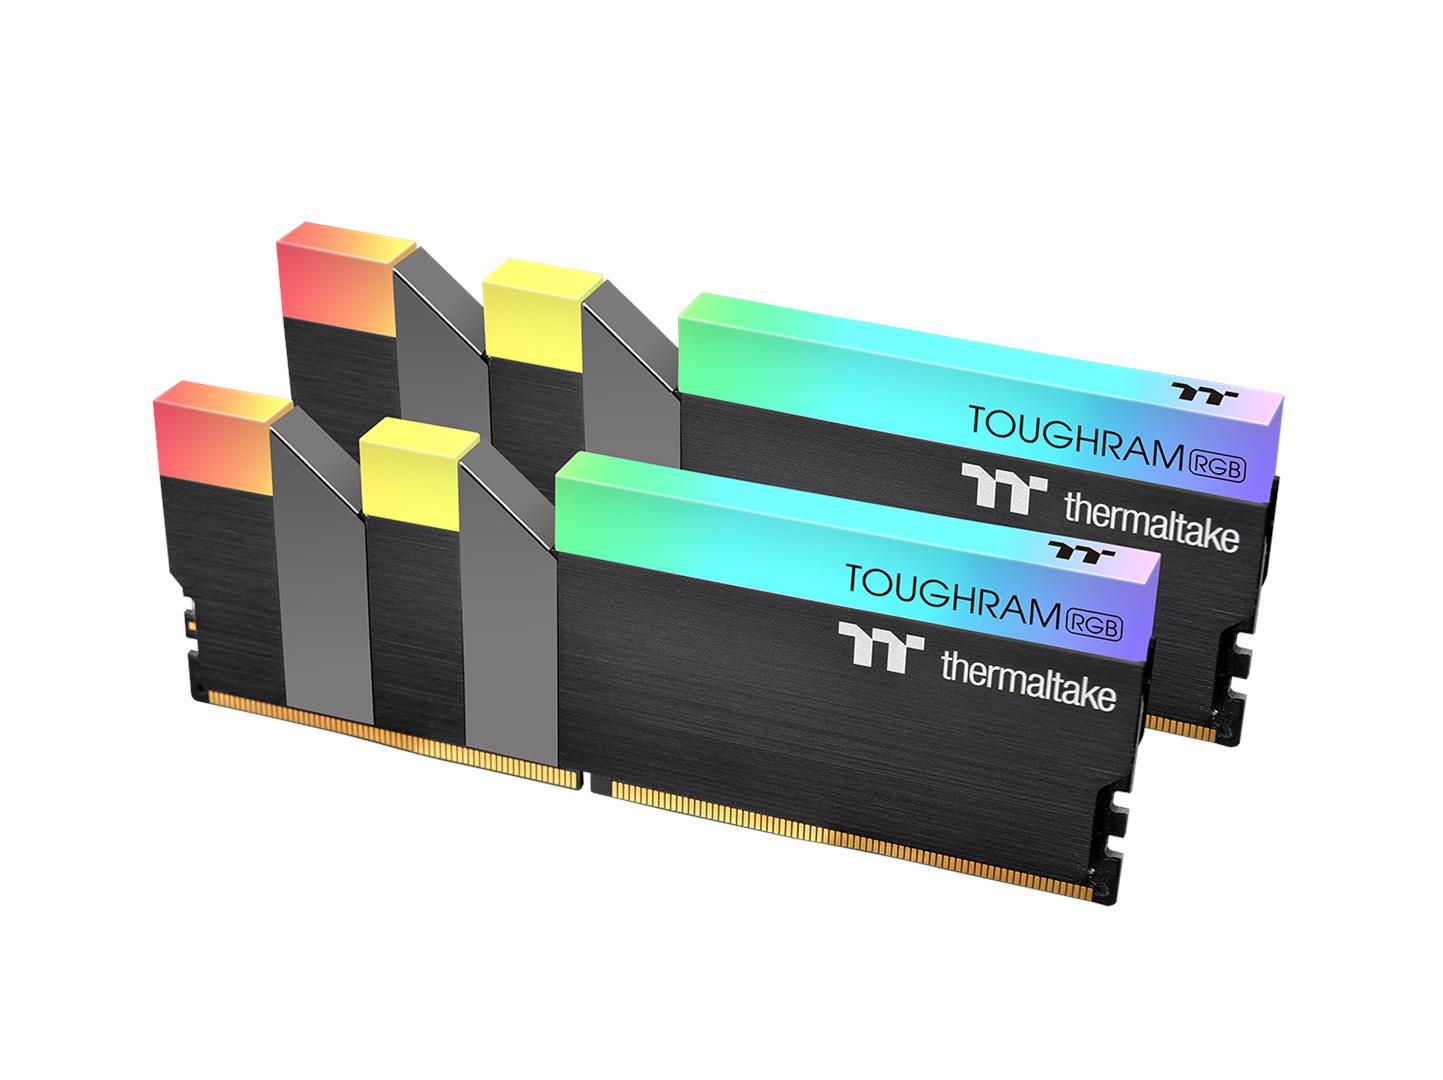 Thermaltake Releases New High Capacity Memory – TOUGHRAM RGB 32GB and 64GB Memory